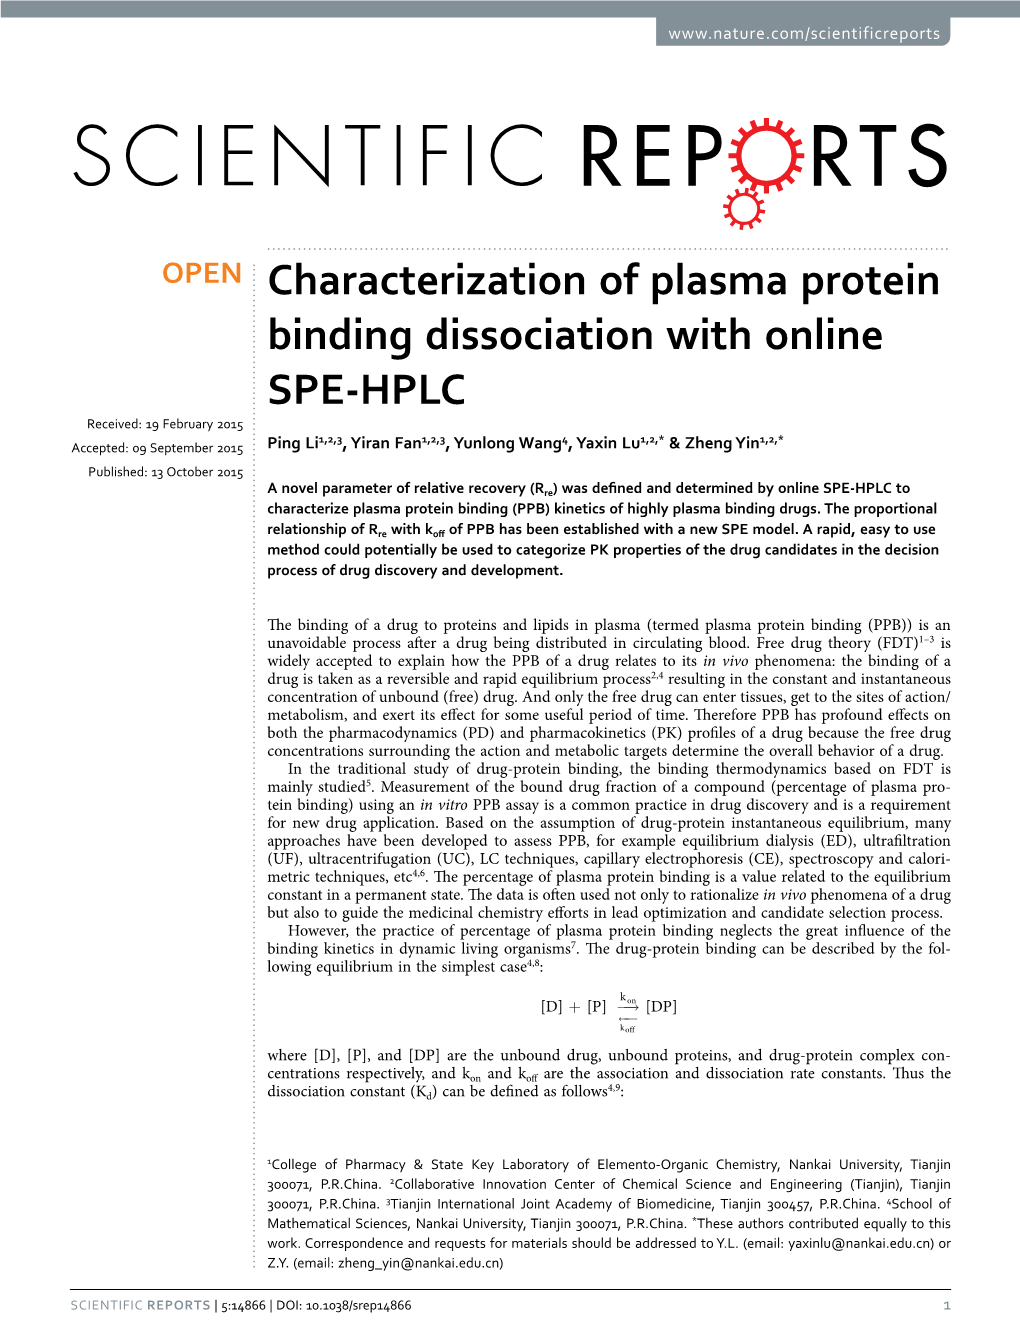 Characterization of Plasma Protein Binding Dissociation with Online